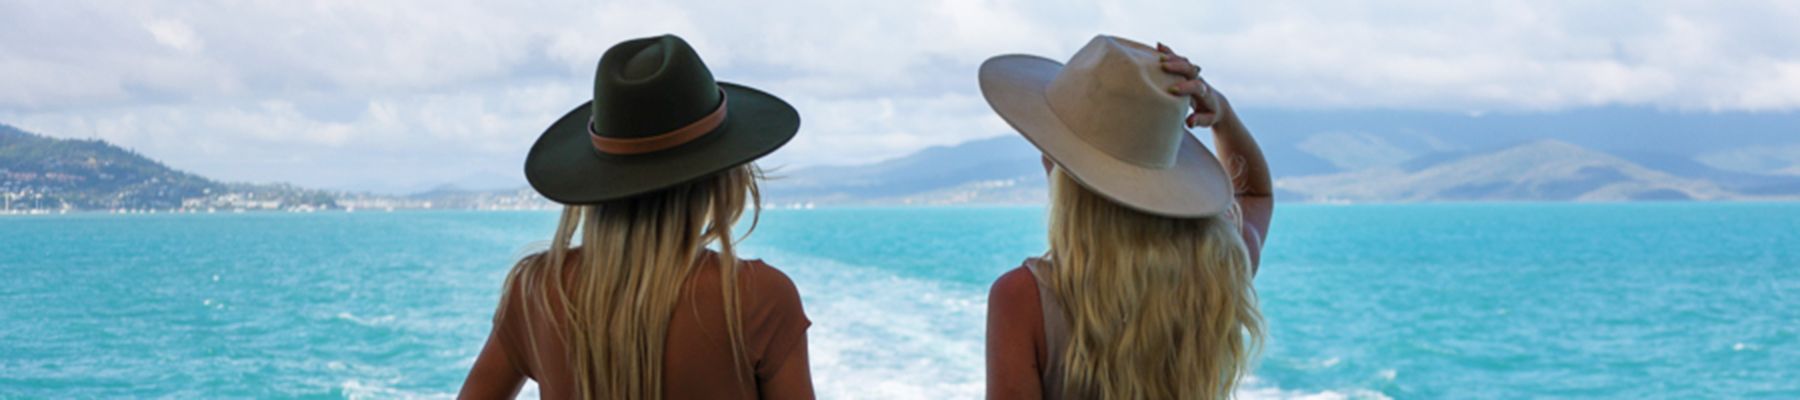 Two women holding their hats onboard a ferry cruise